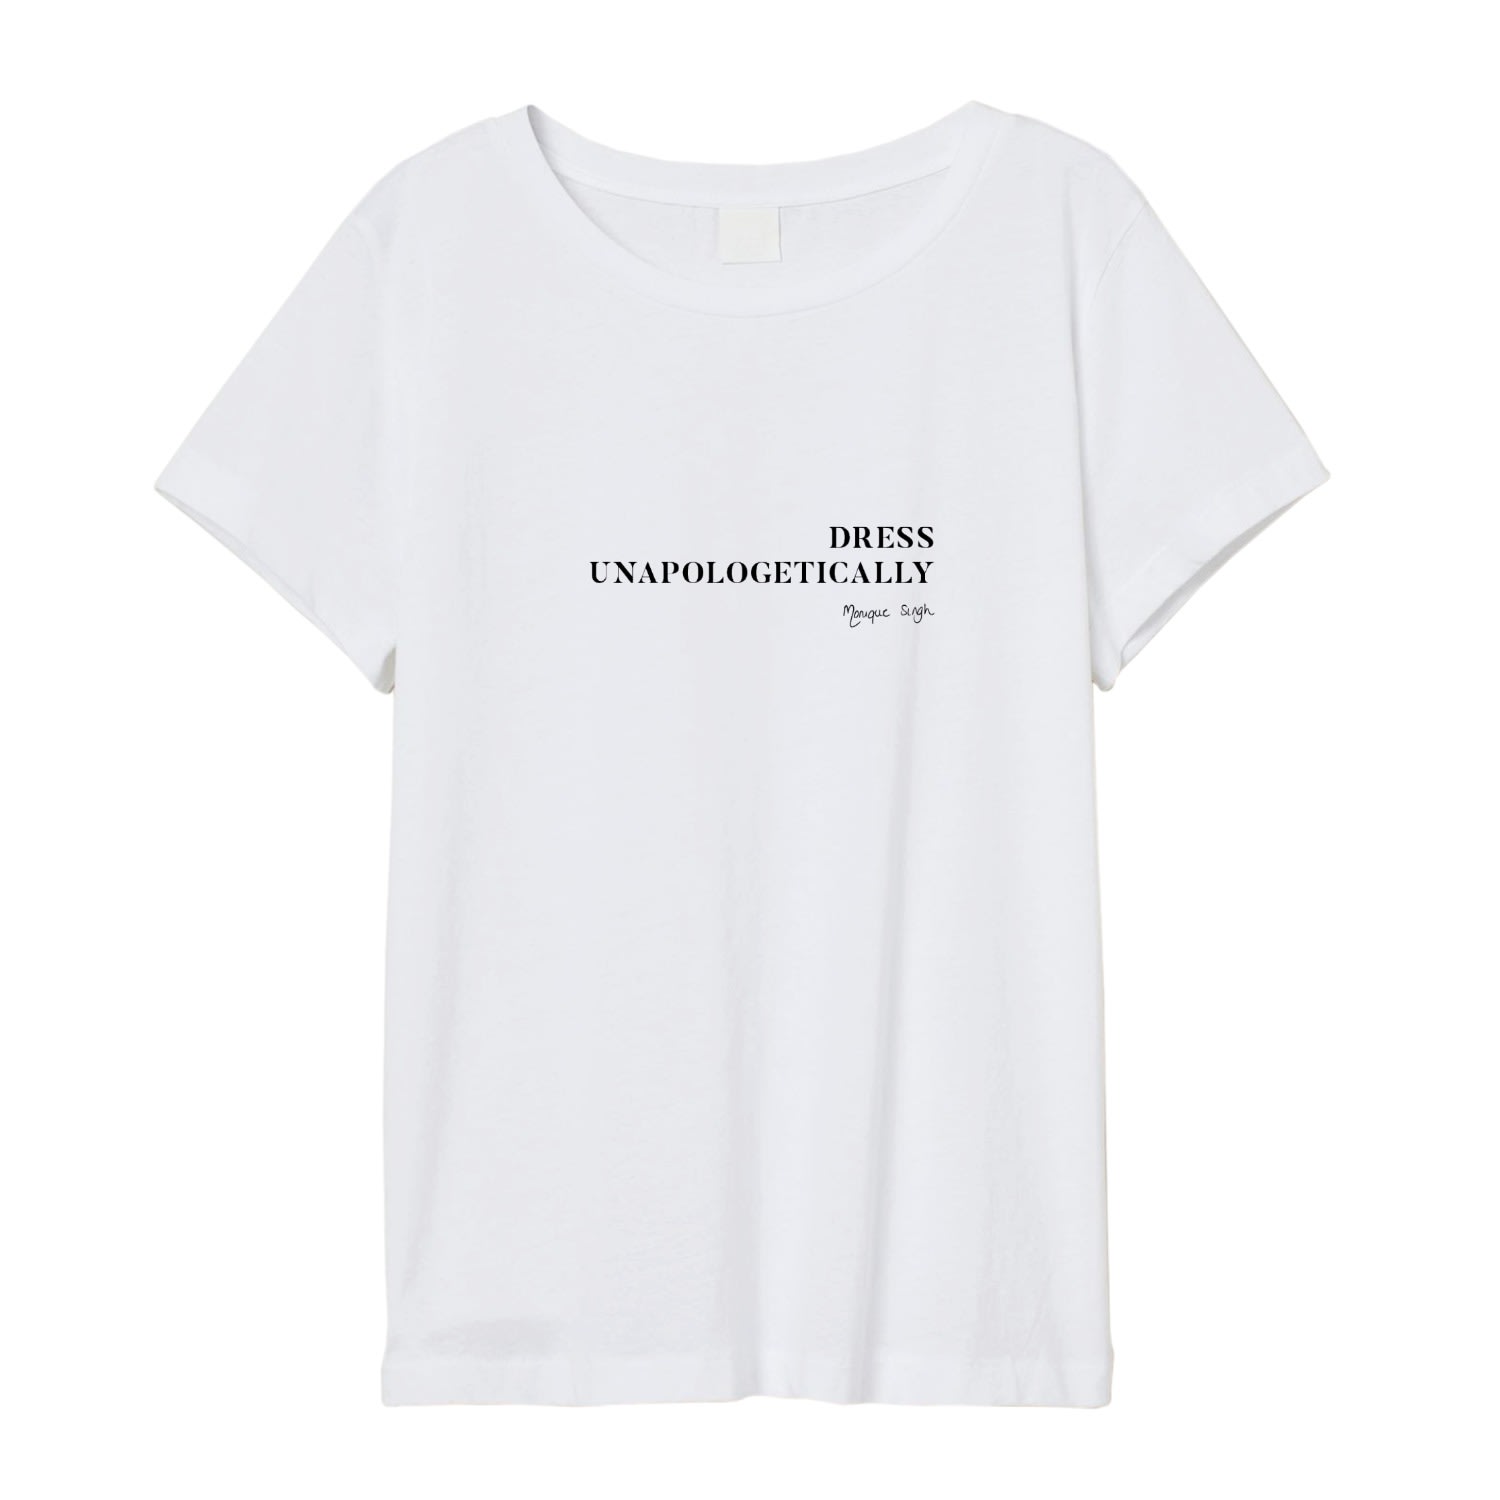 Women’s White Dress Unapologetically Tee T-Shirt Large Monique Singh